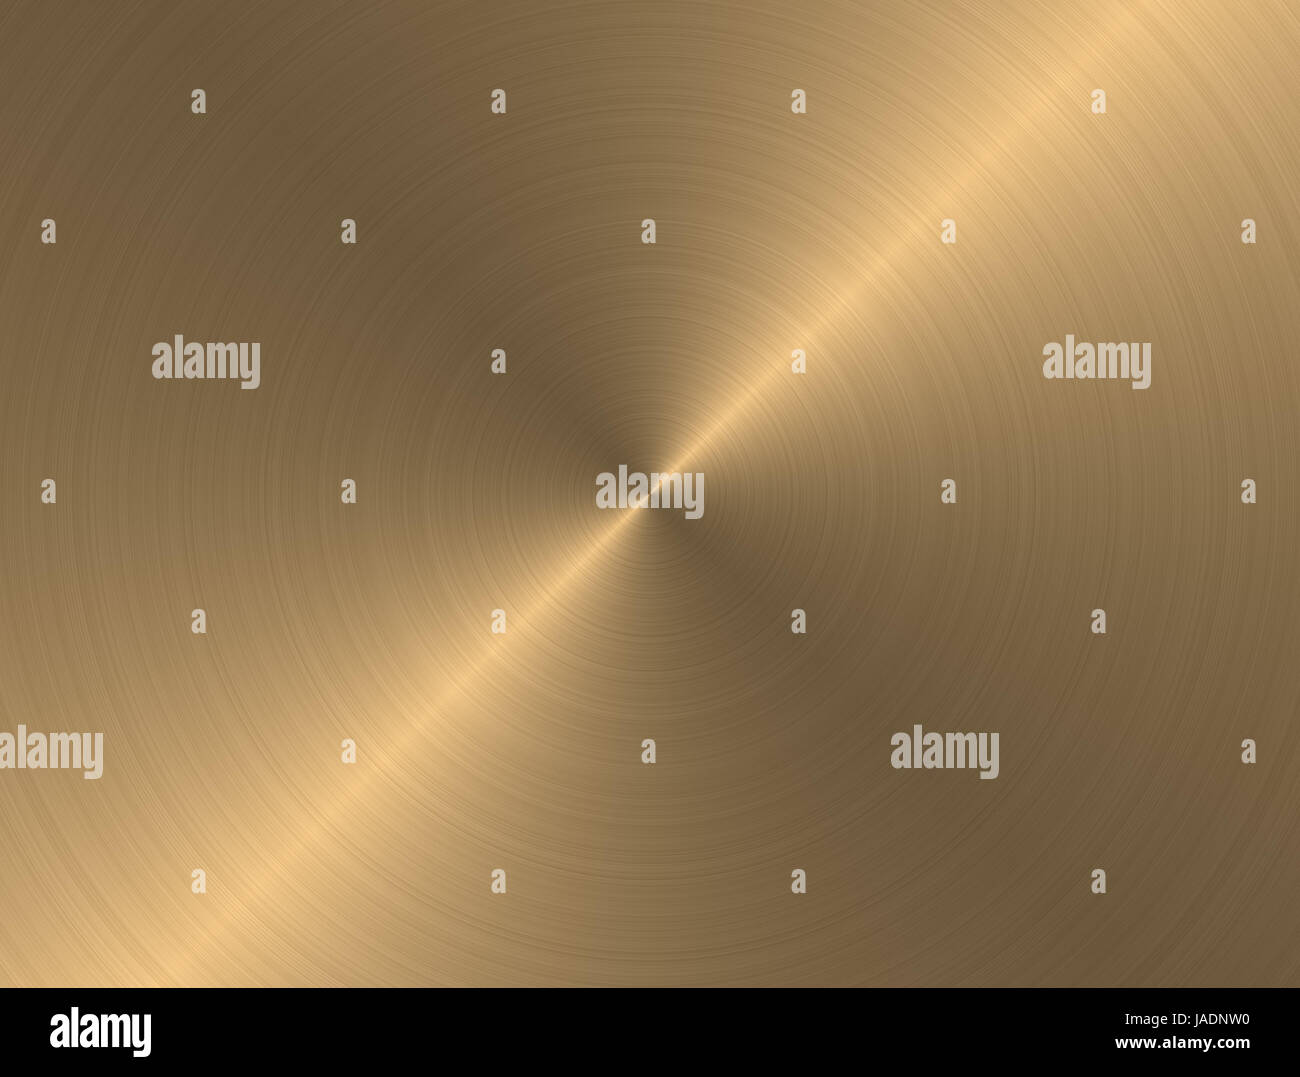 Gold metal background with realistic circular brushed texture Stock Photo